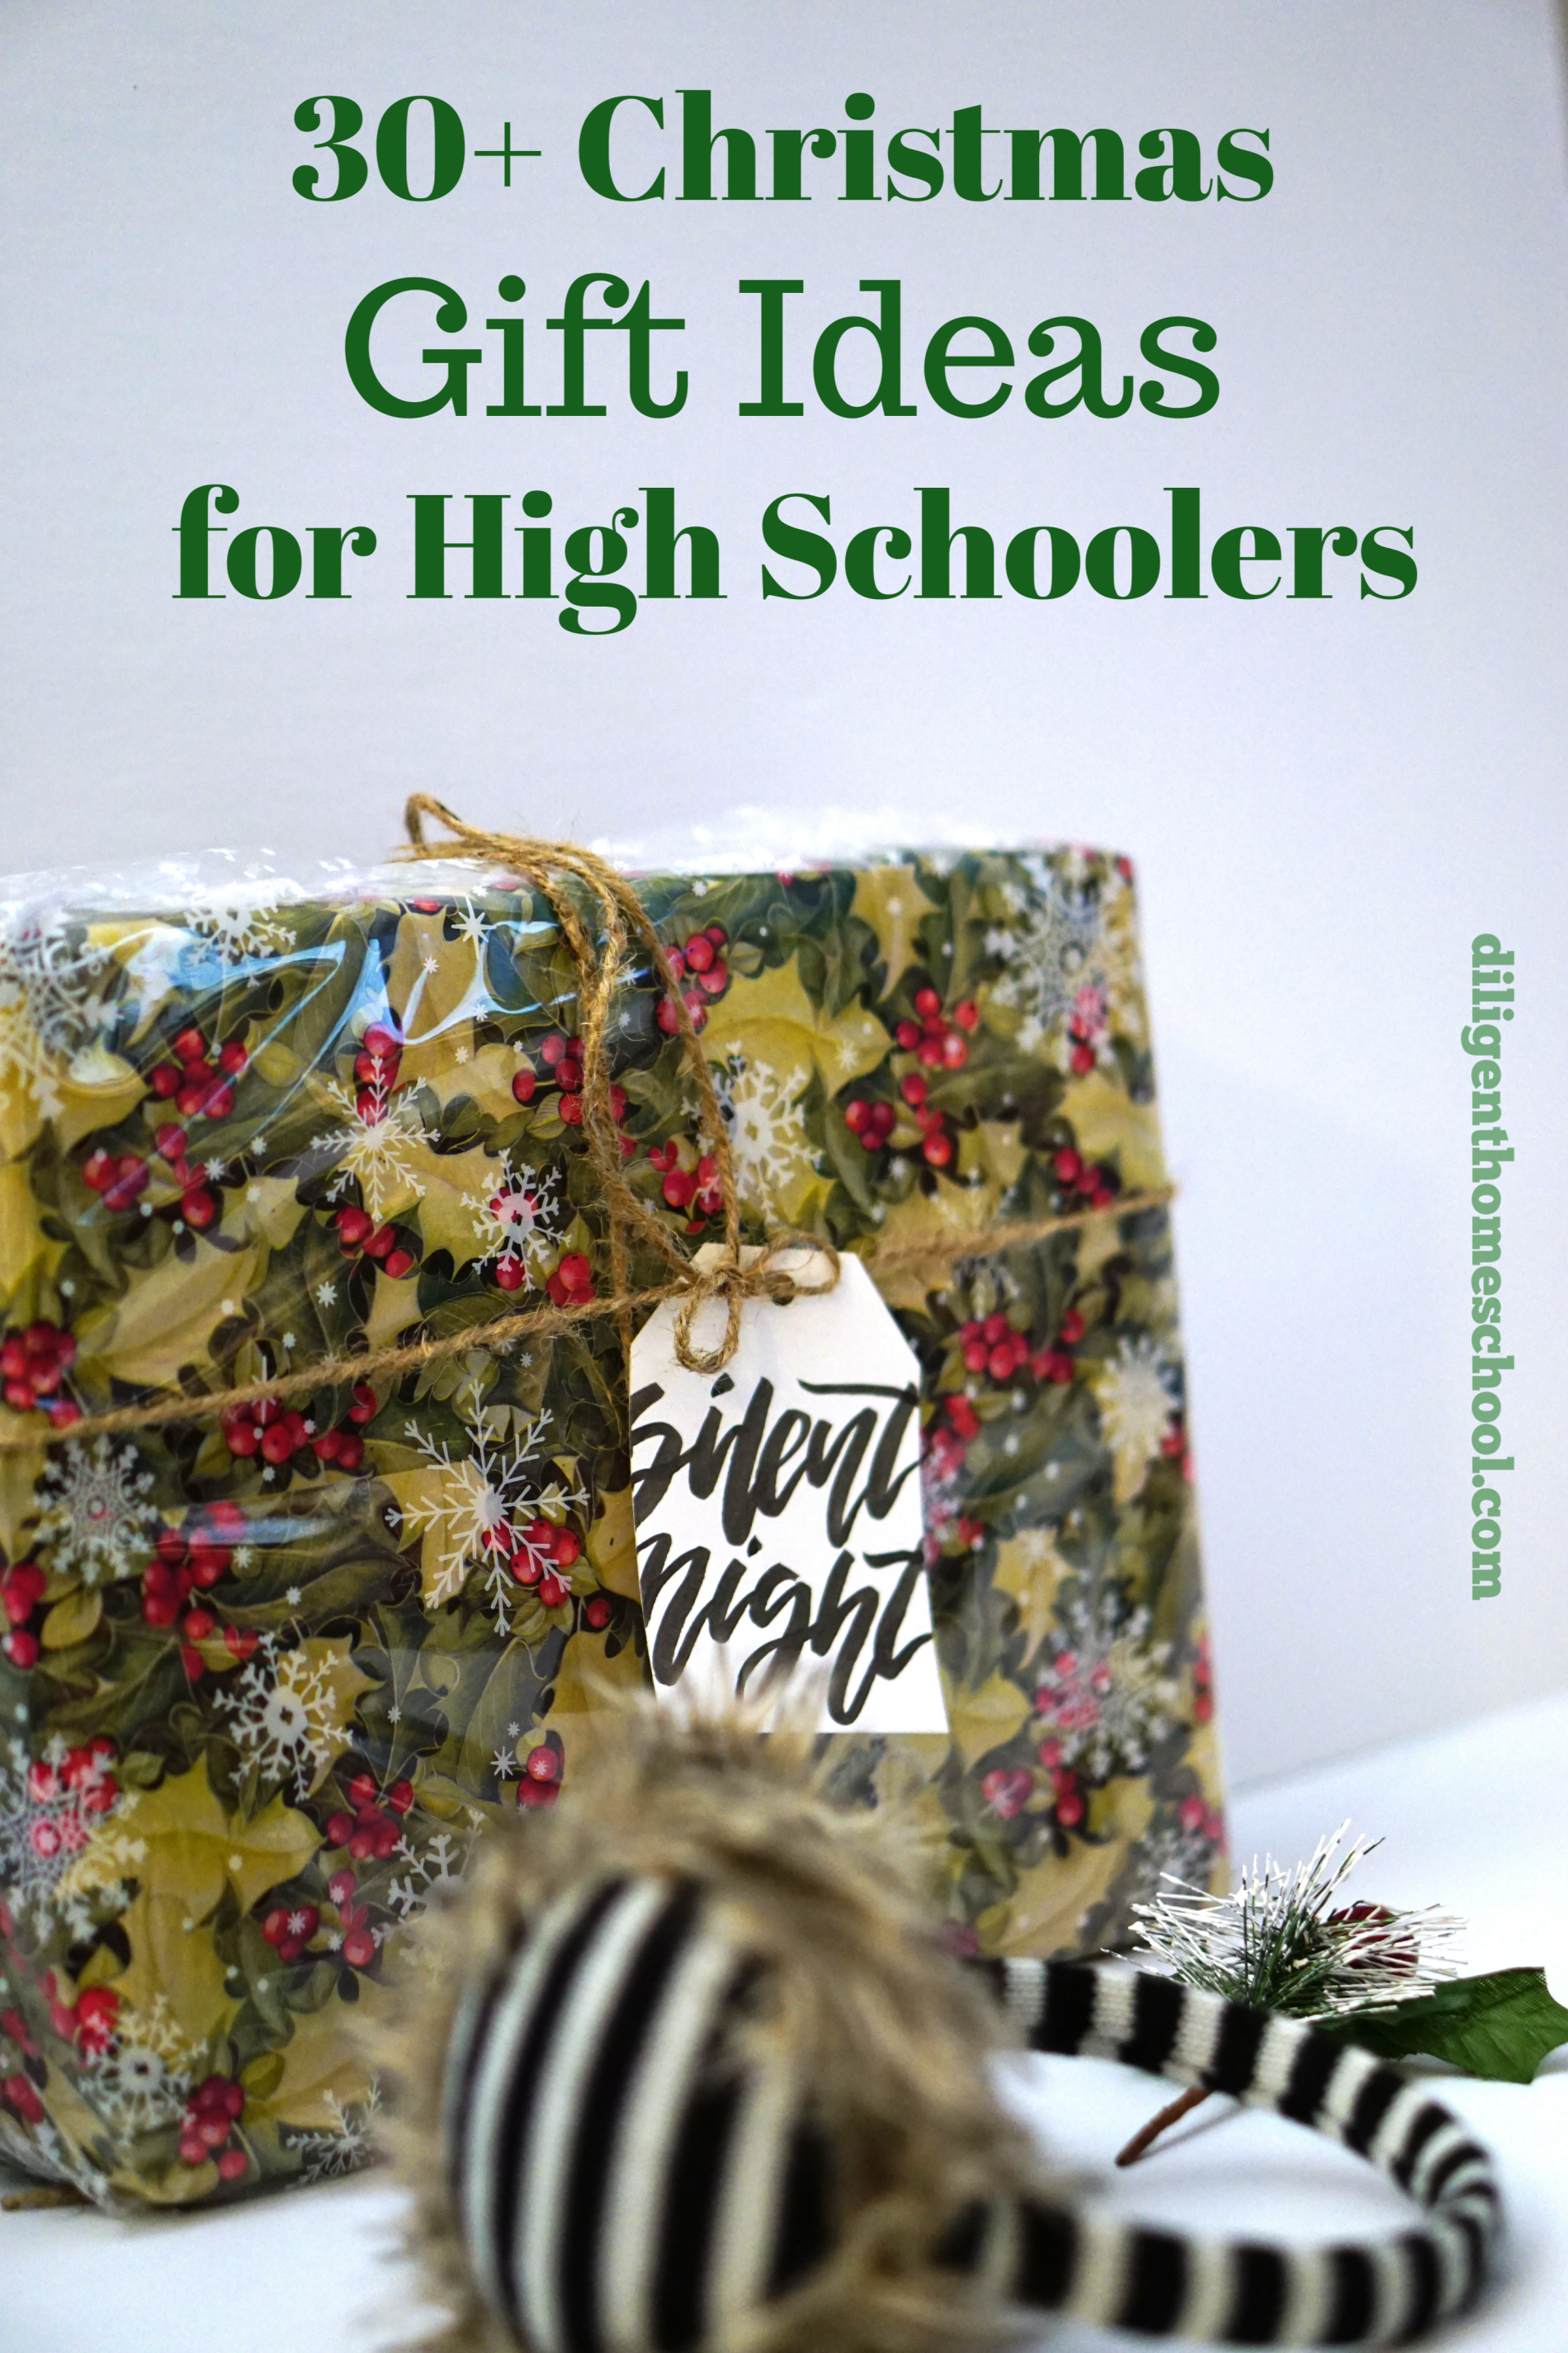 It's challenging and exciting to find the right gift for teens. Our list of 30+ Christmas gift ideas for high schoolers fits perfectly under your tree! 